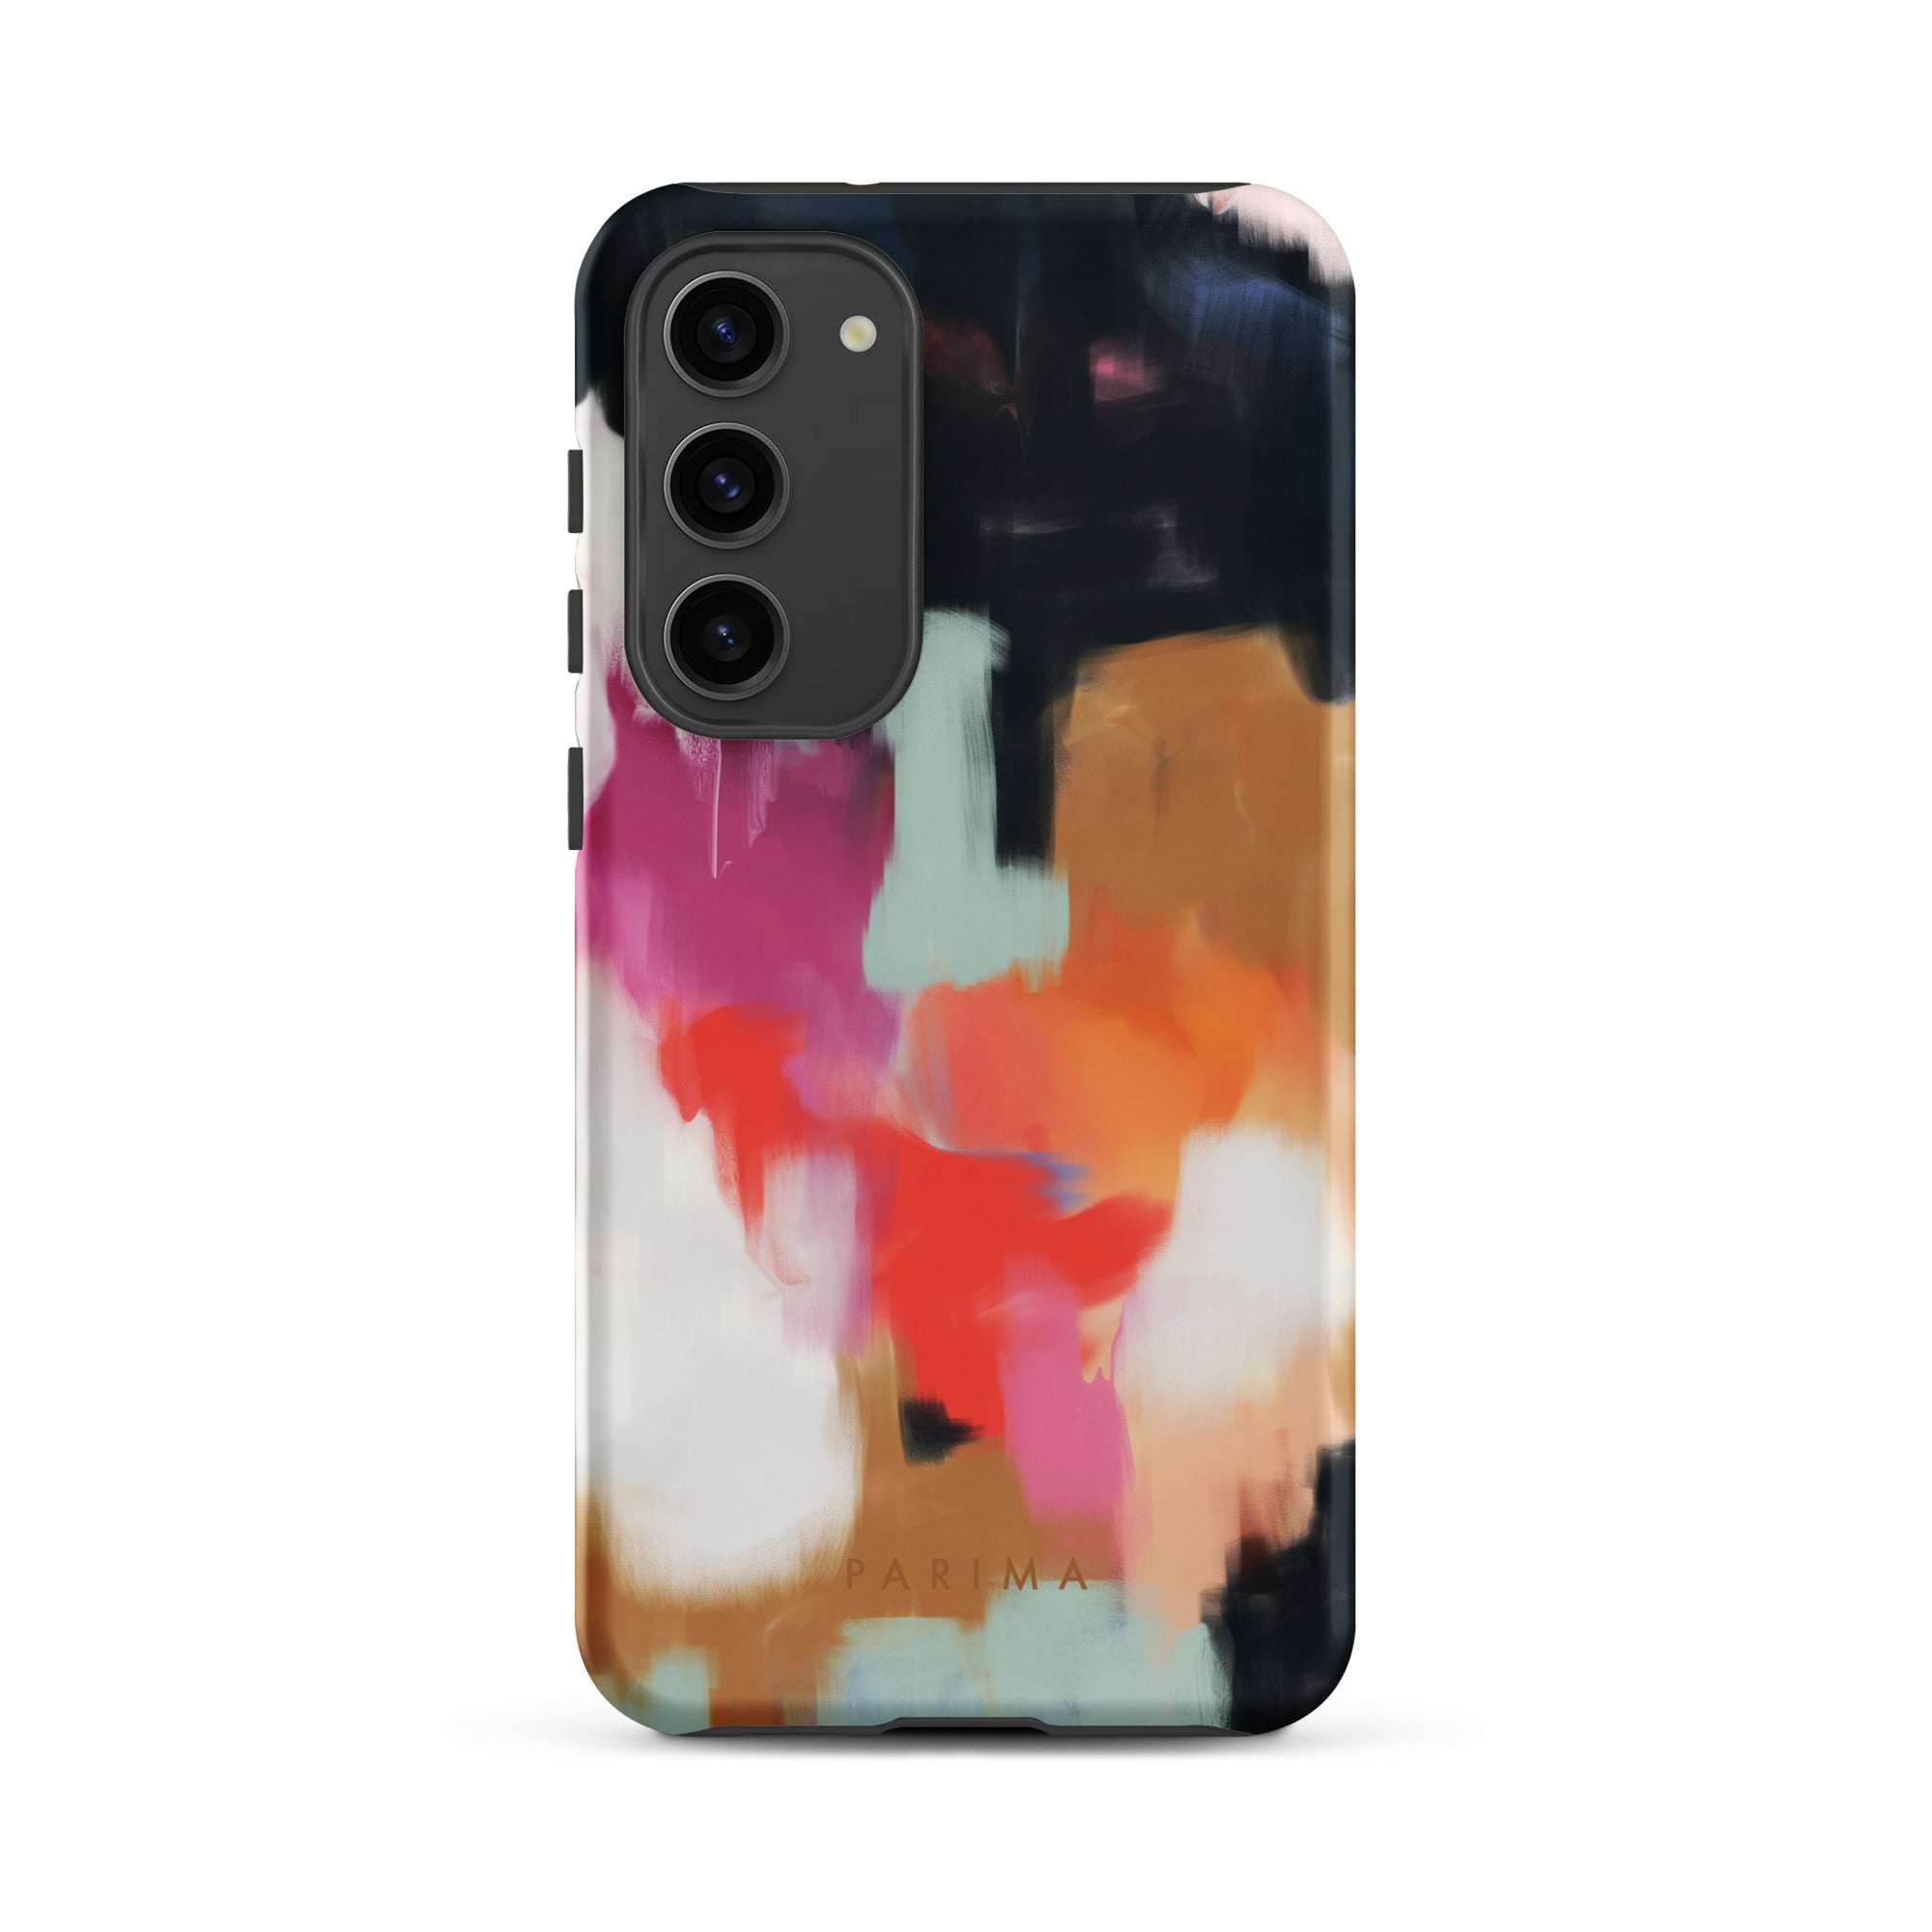 Ruthie, blue and pink abstract art on Samsung Galaxy S23 Plus tough case by Parima Studio